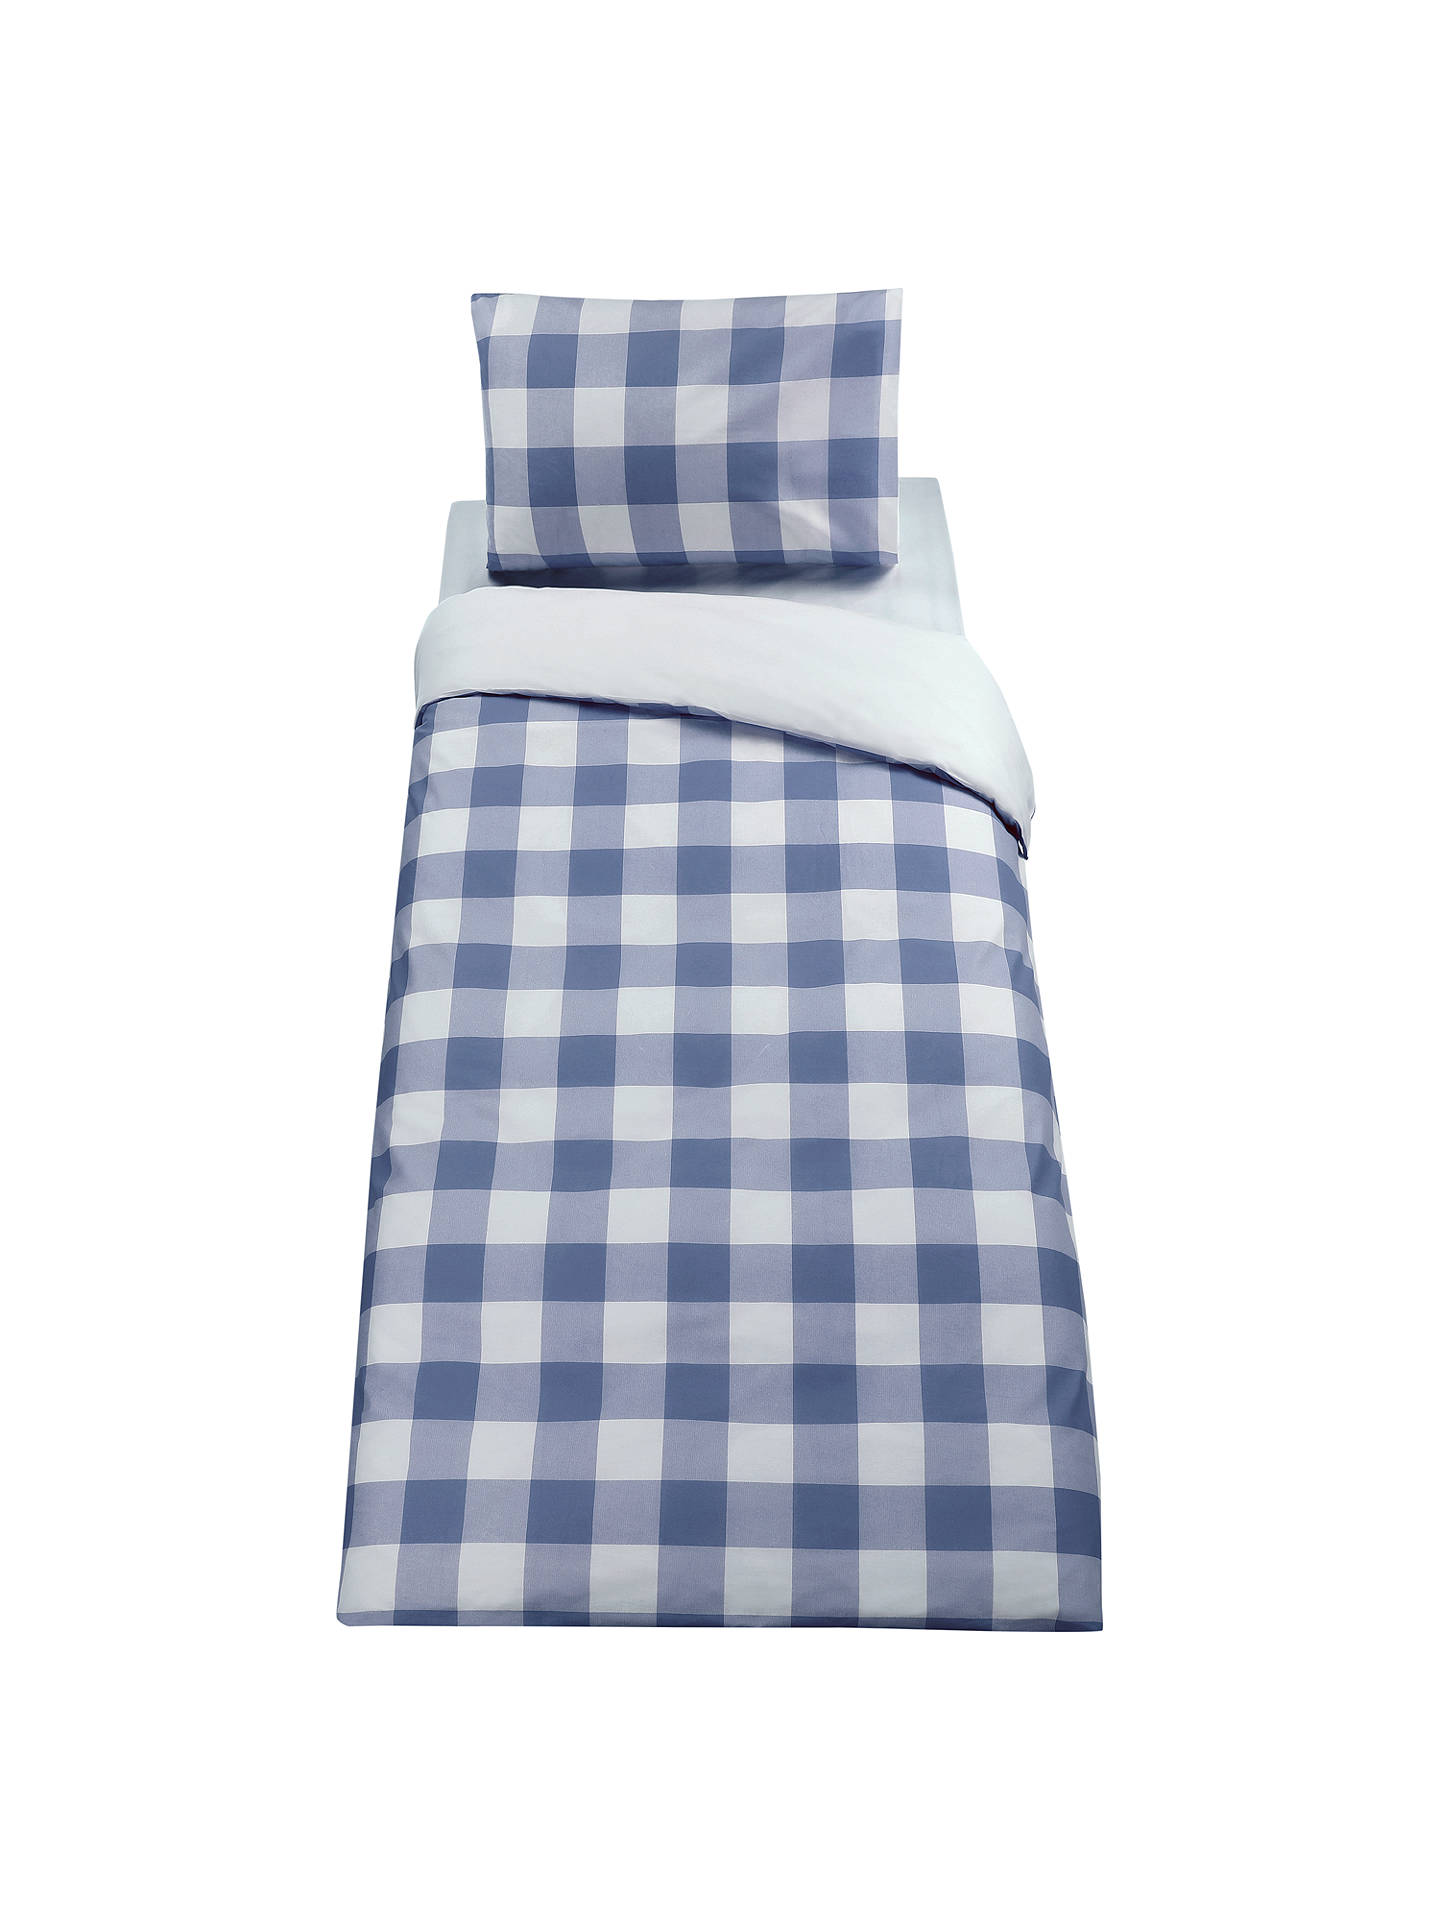 Little Home At John Lewis Gingham Check Duvet Cover And Pillowcase